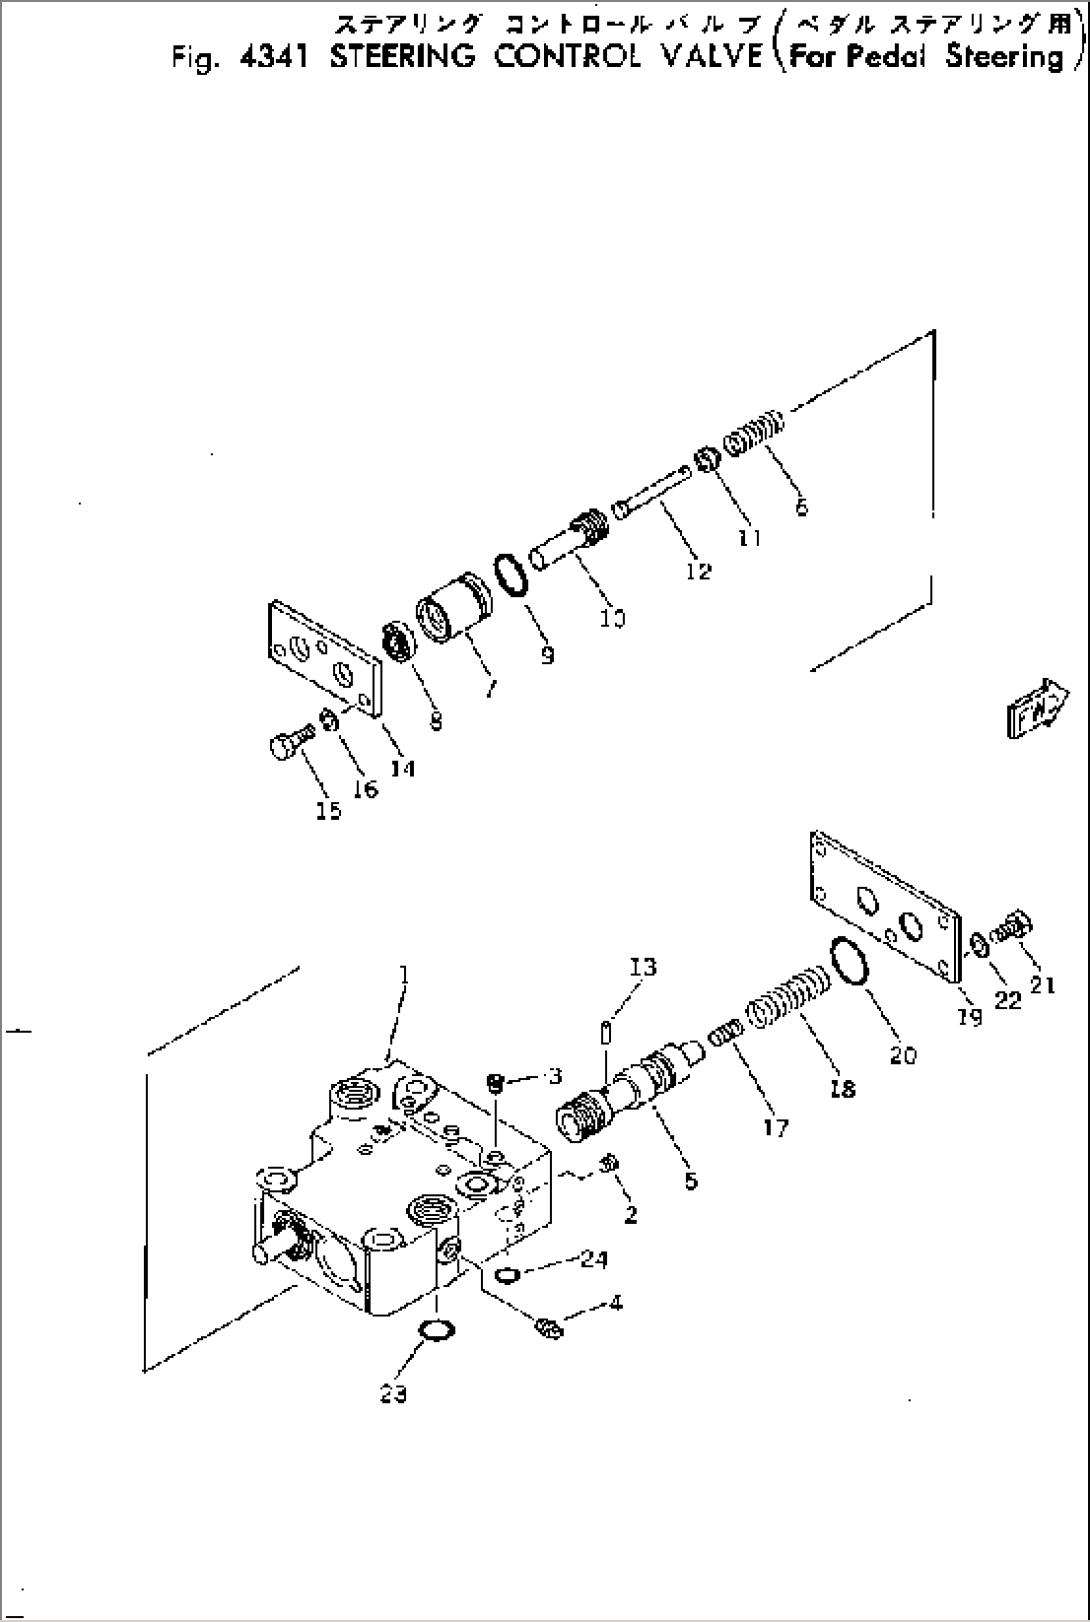 STEERING CONTROL VALVE (FOR PEDAL STEERING)